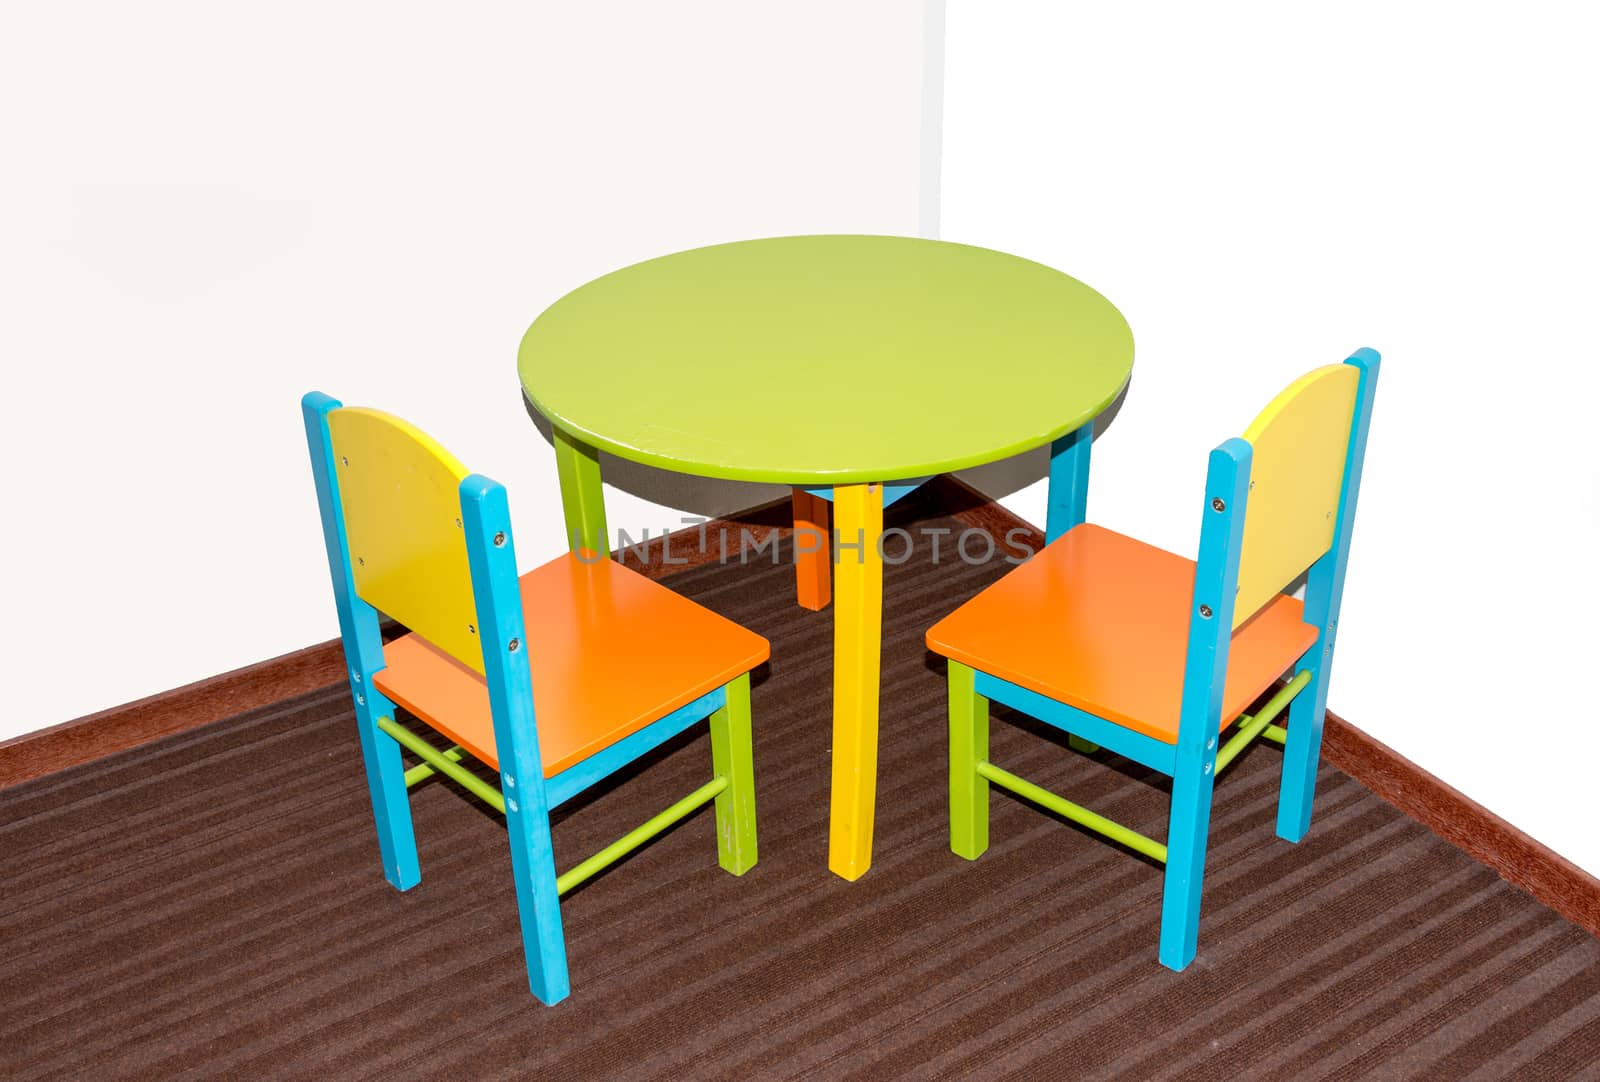 two small school chairs and table by compuinfoto